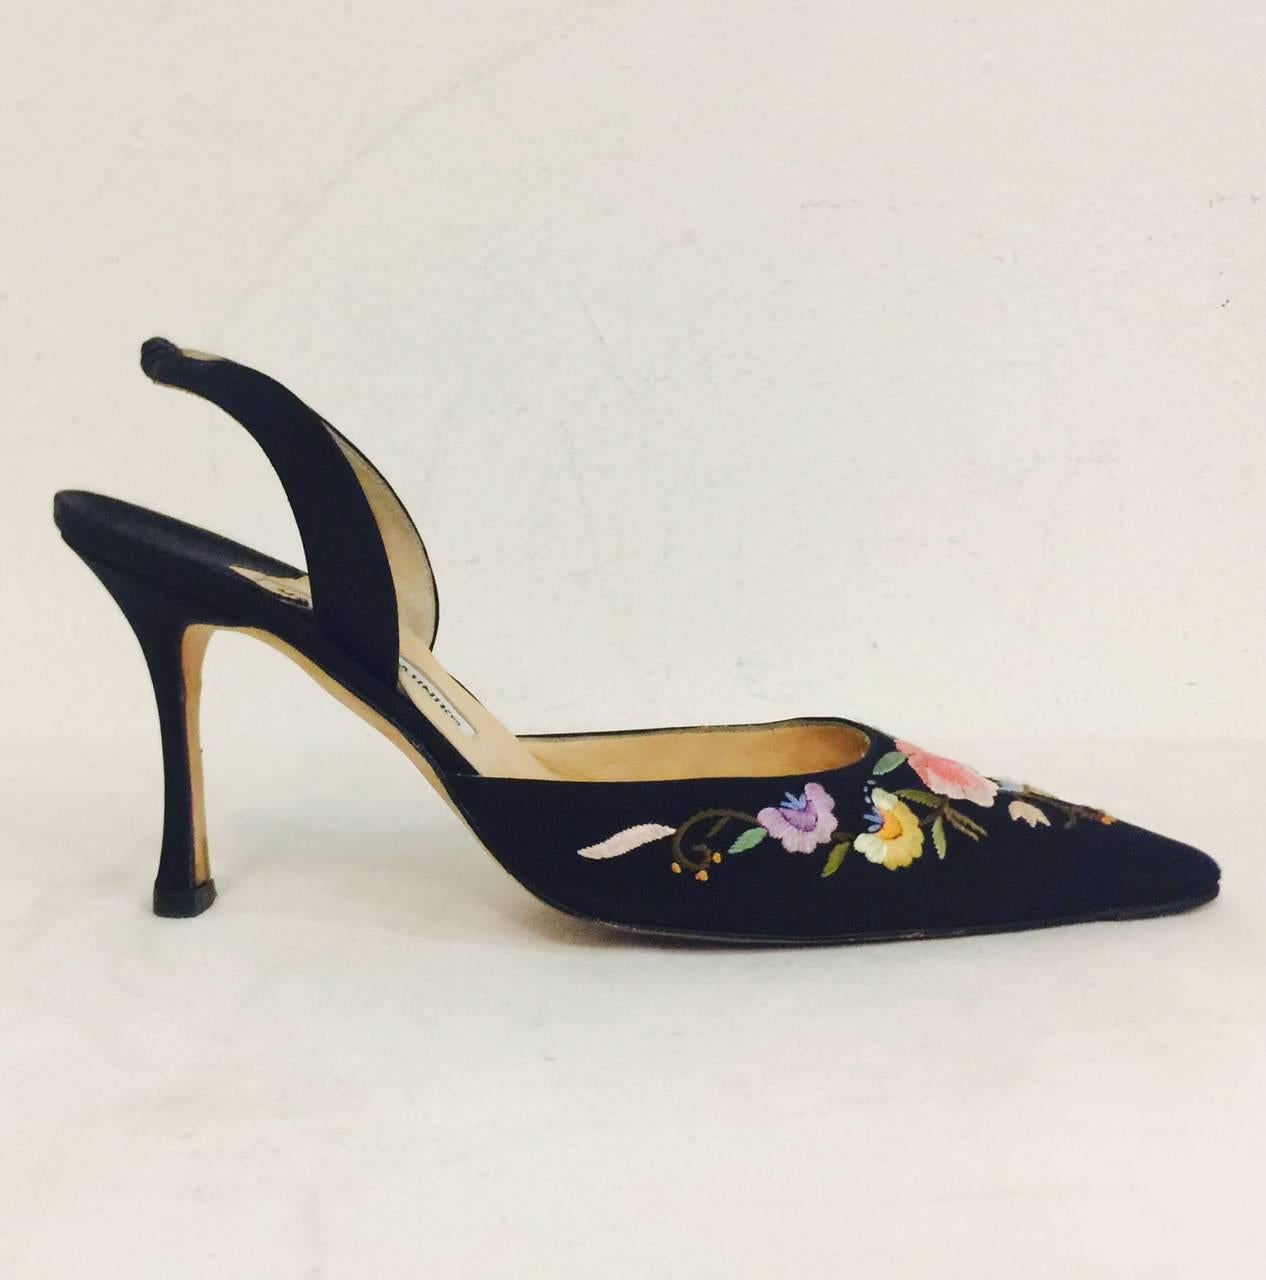 These Black Silk Evening Slingback High Heels are typical of 